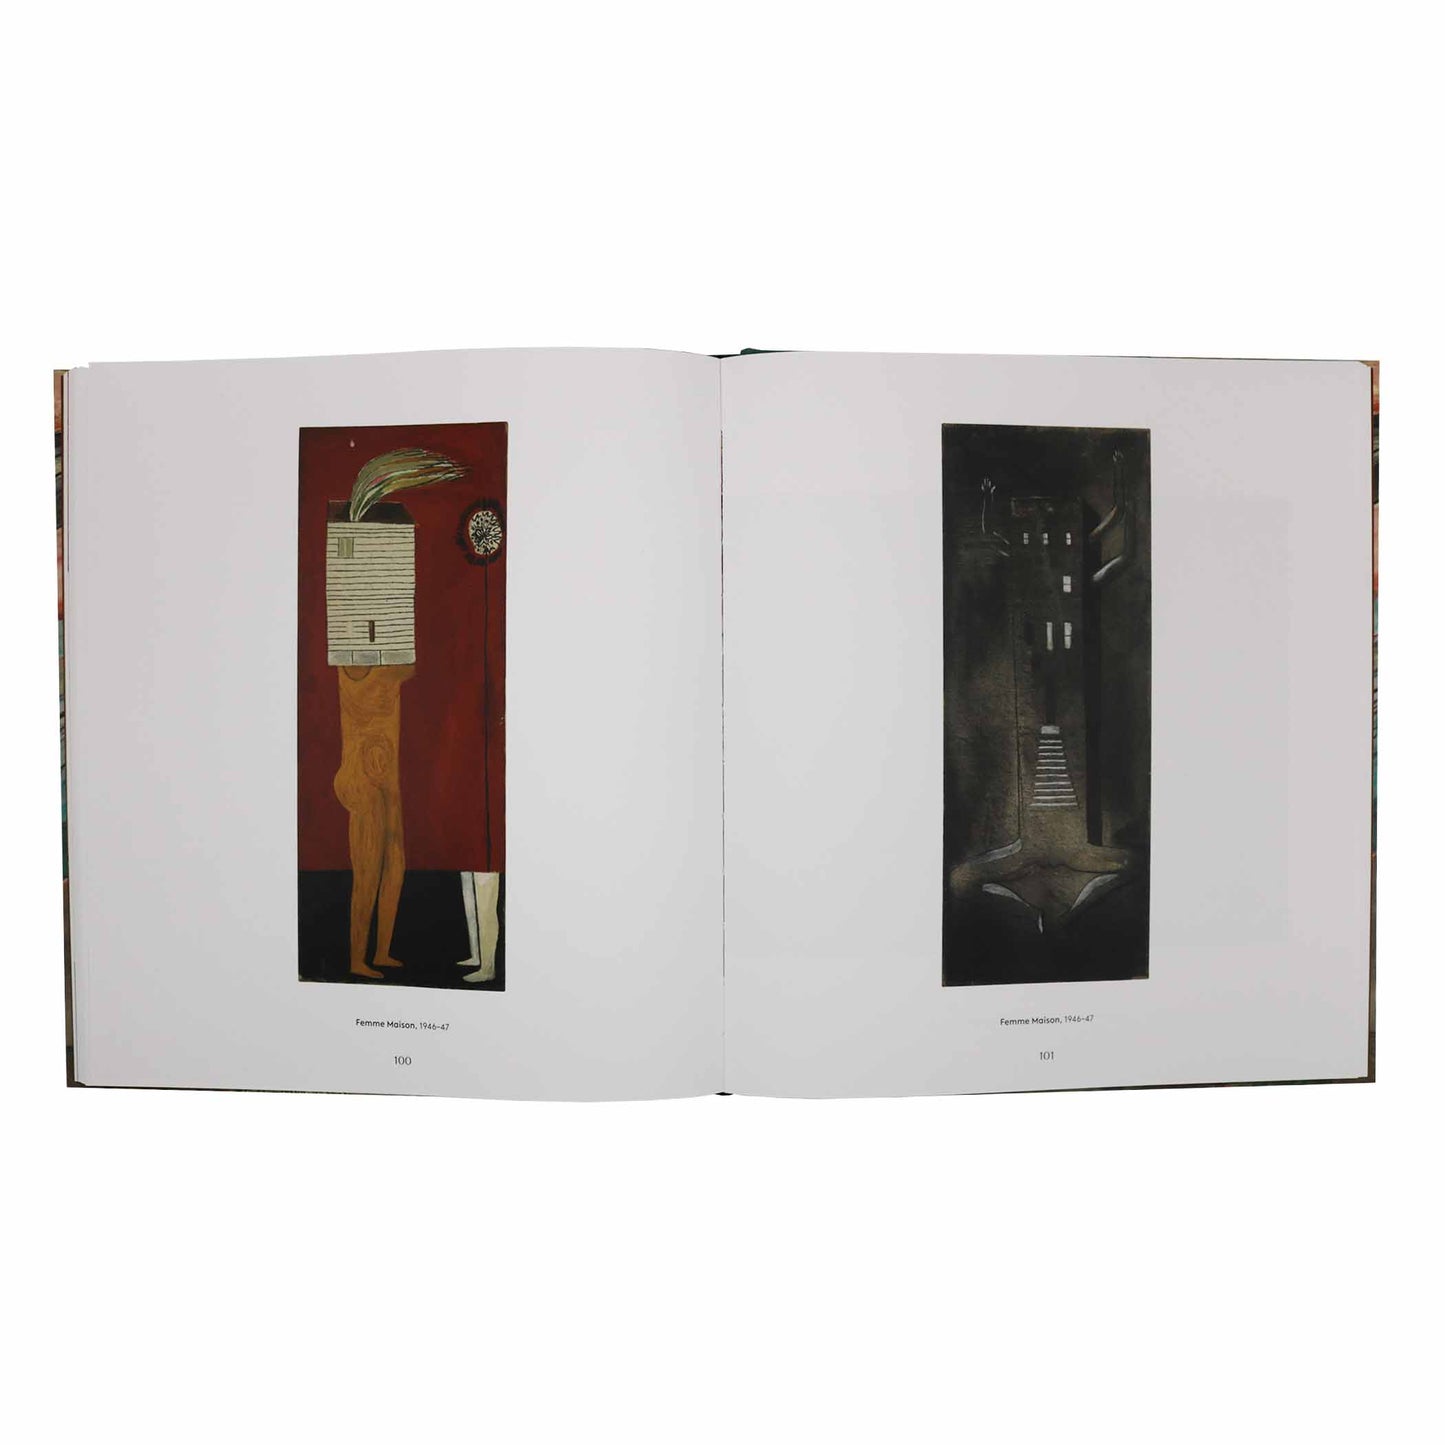 Louise Bourgeois: Paintings Catalogue